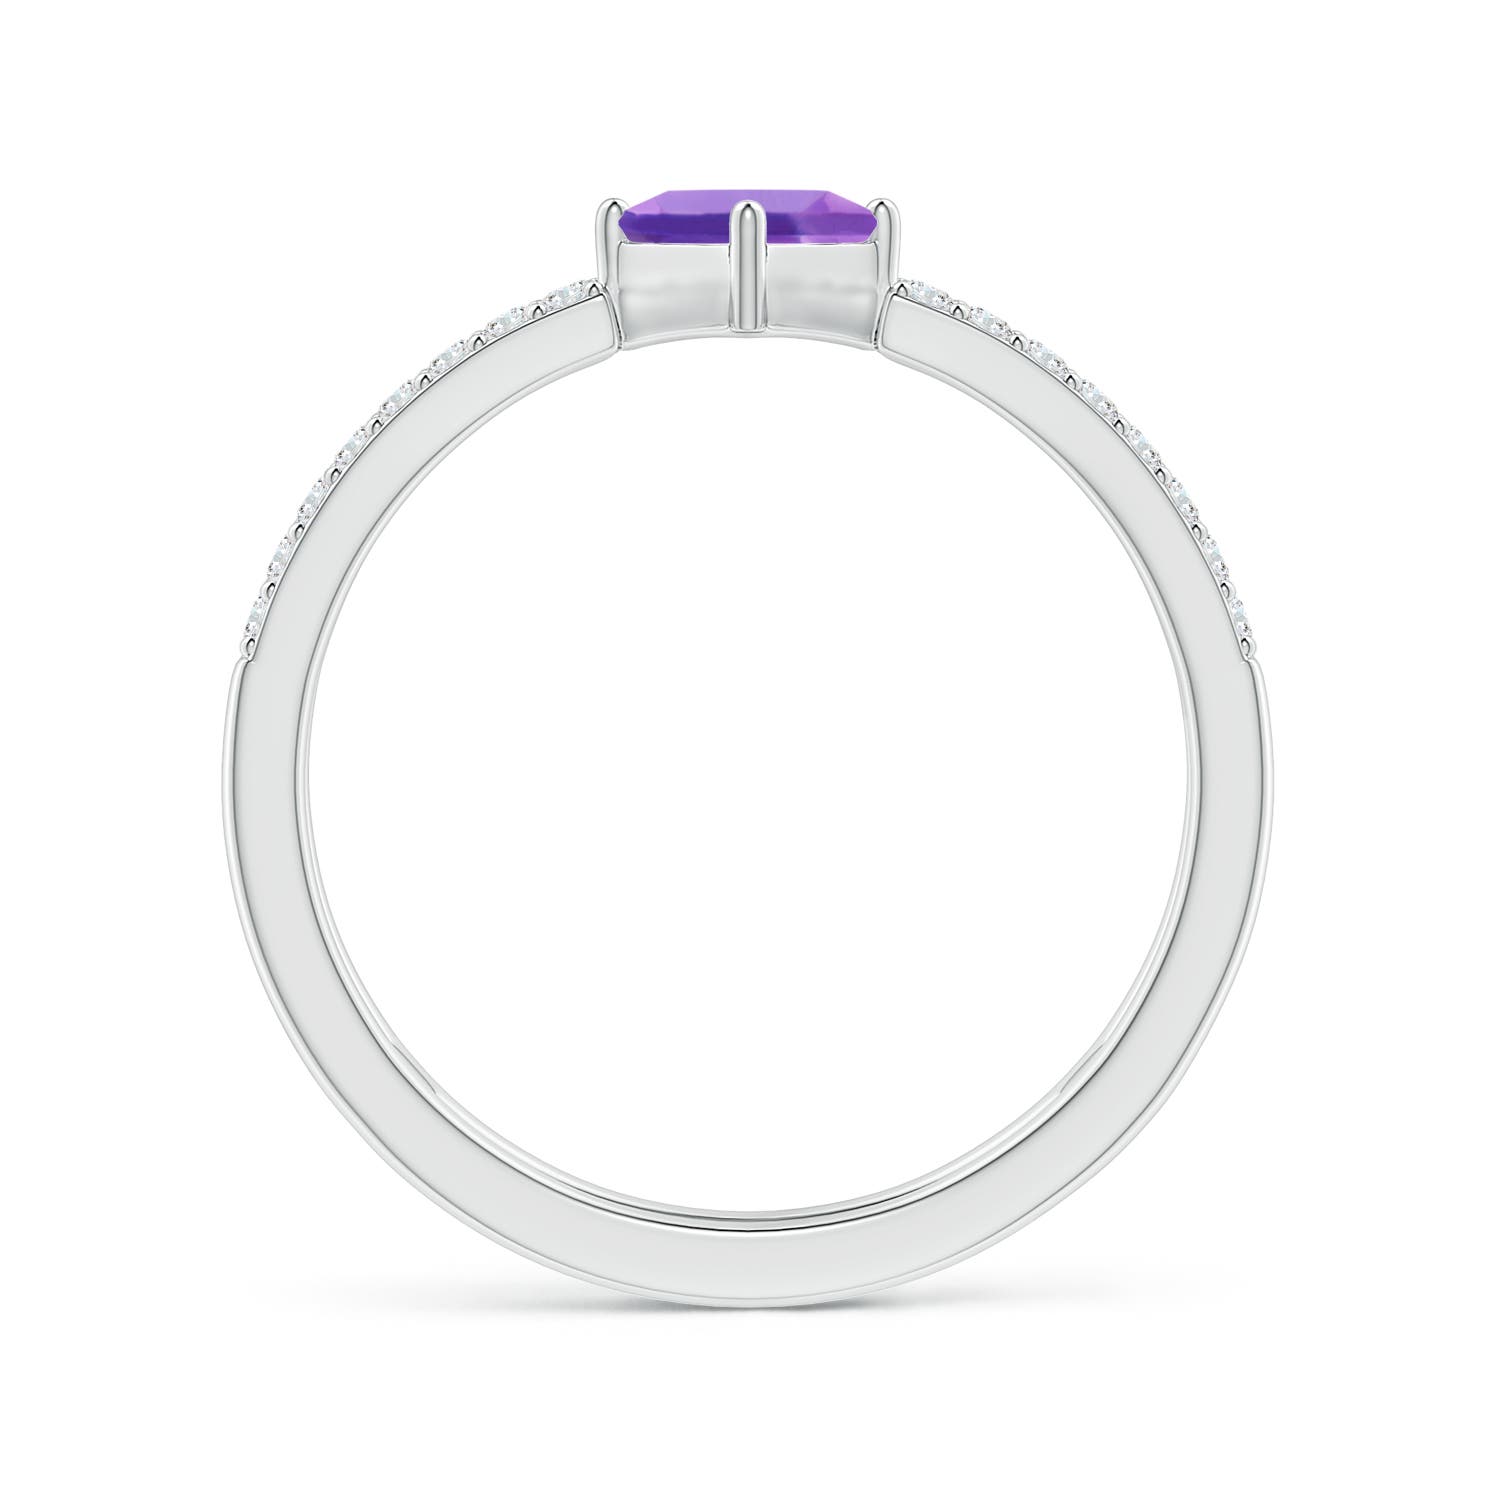 AA - Amethyst / 0.58 CT / 14 KT White Gold